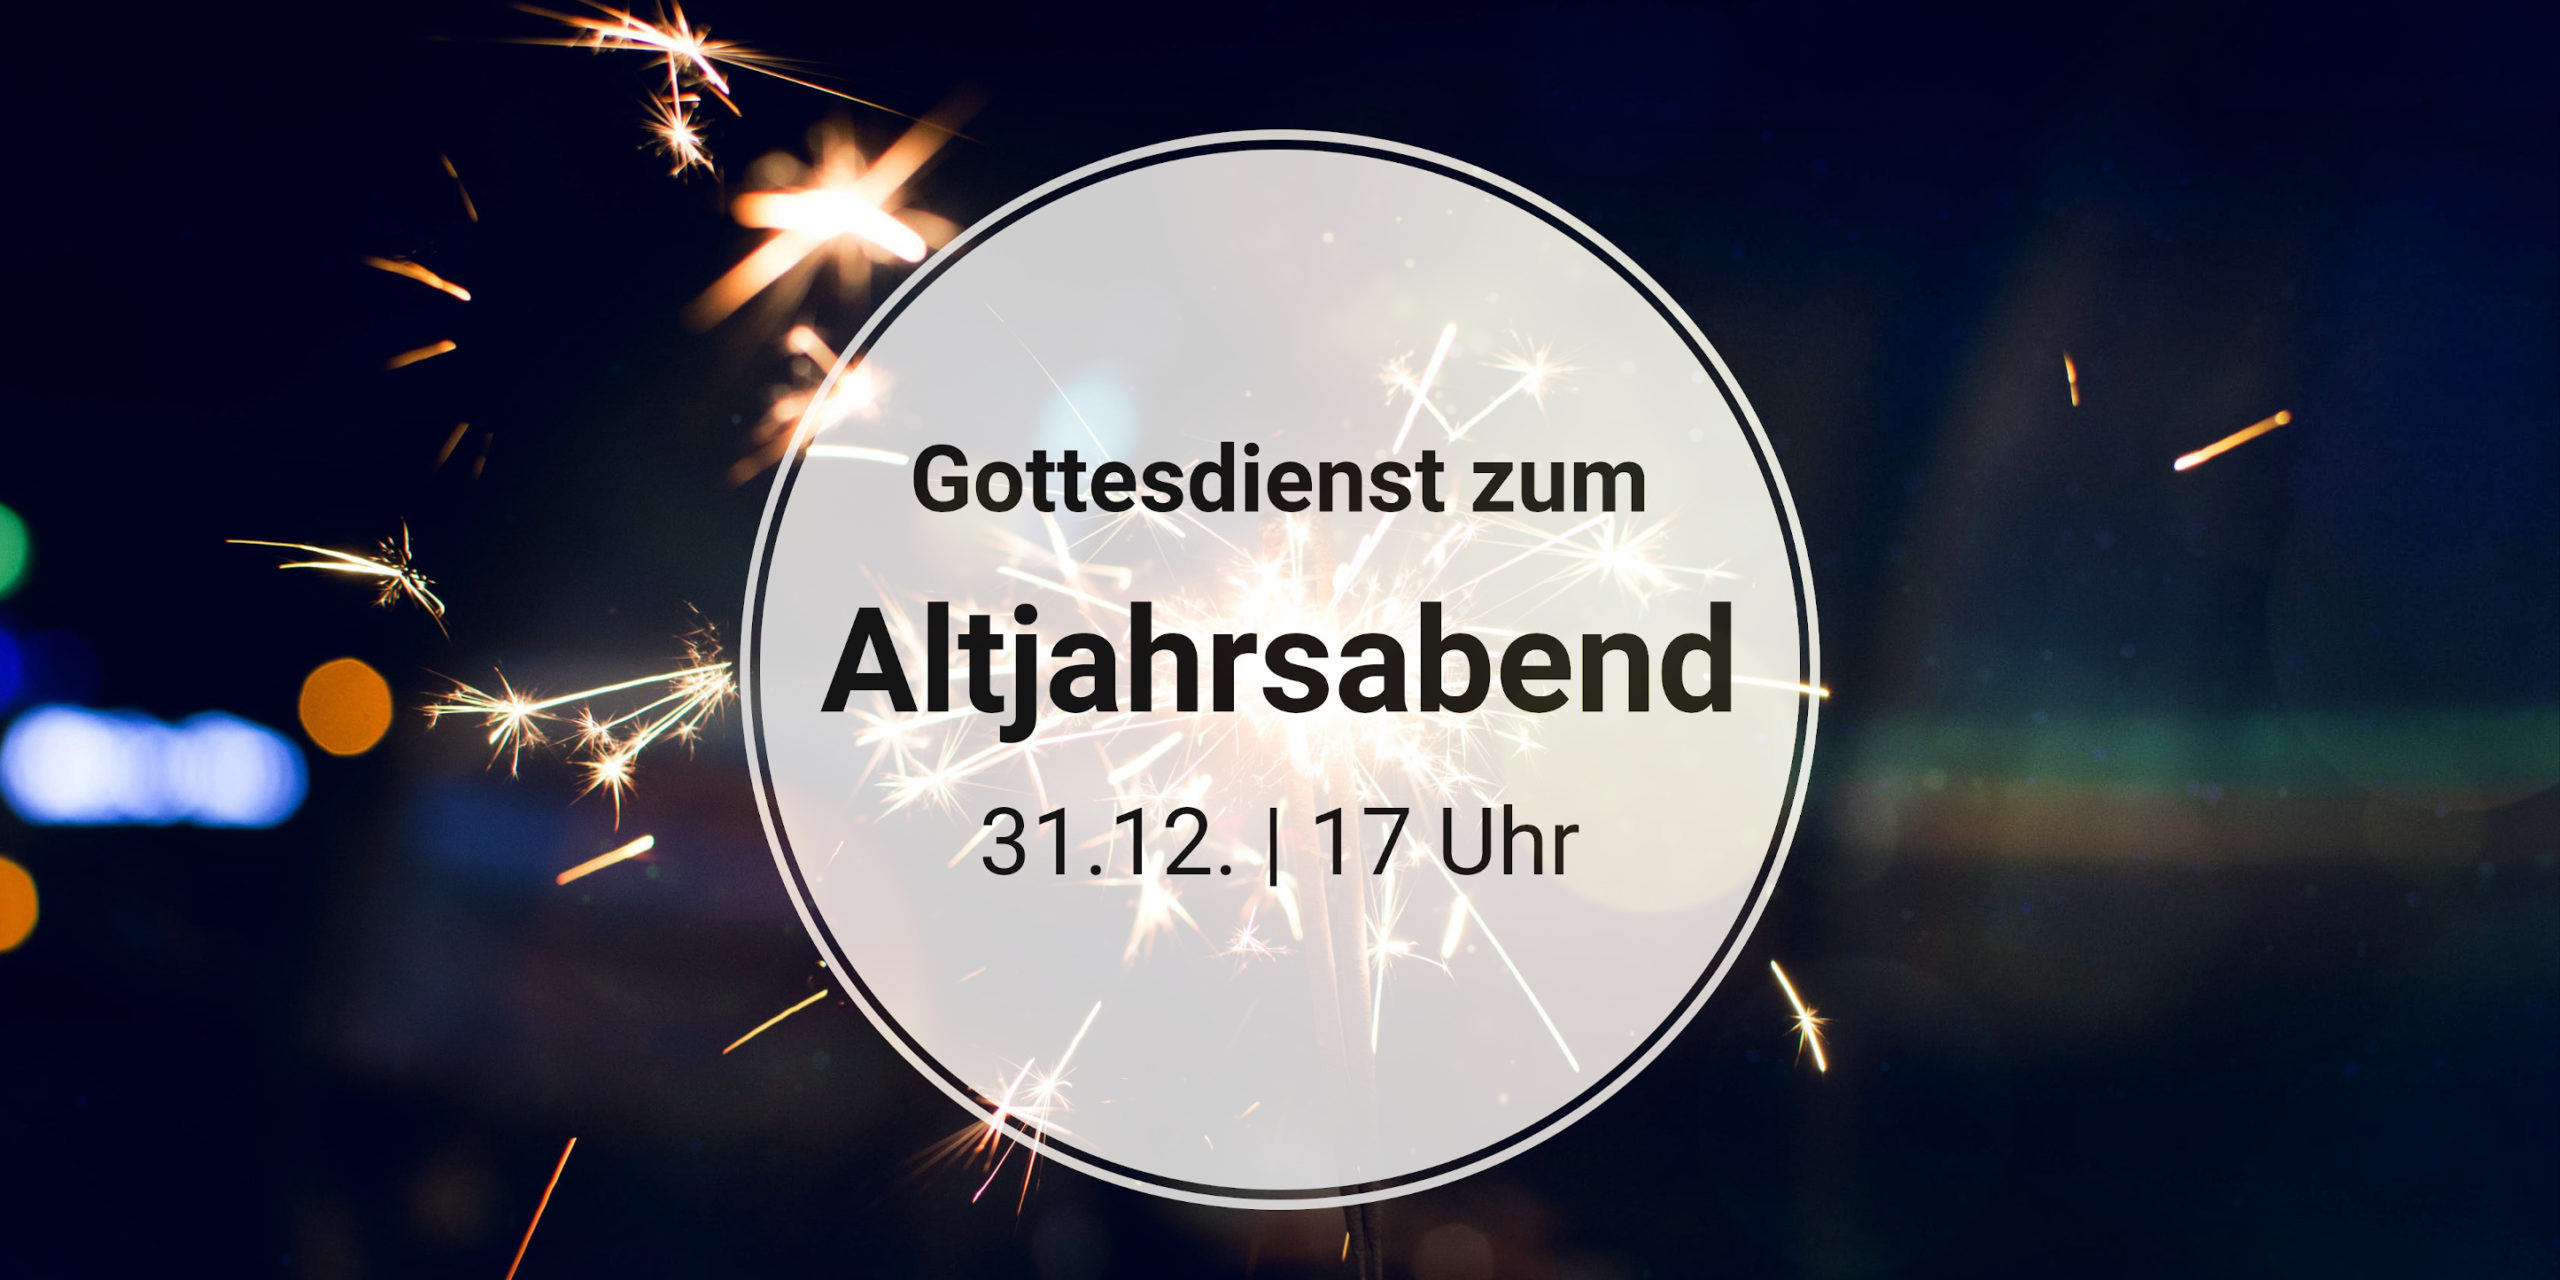 You are currently viewing Gottesdienst zum Altjahrsabend